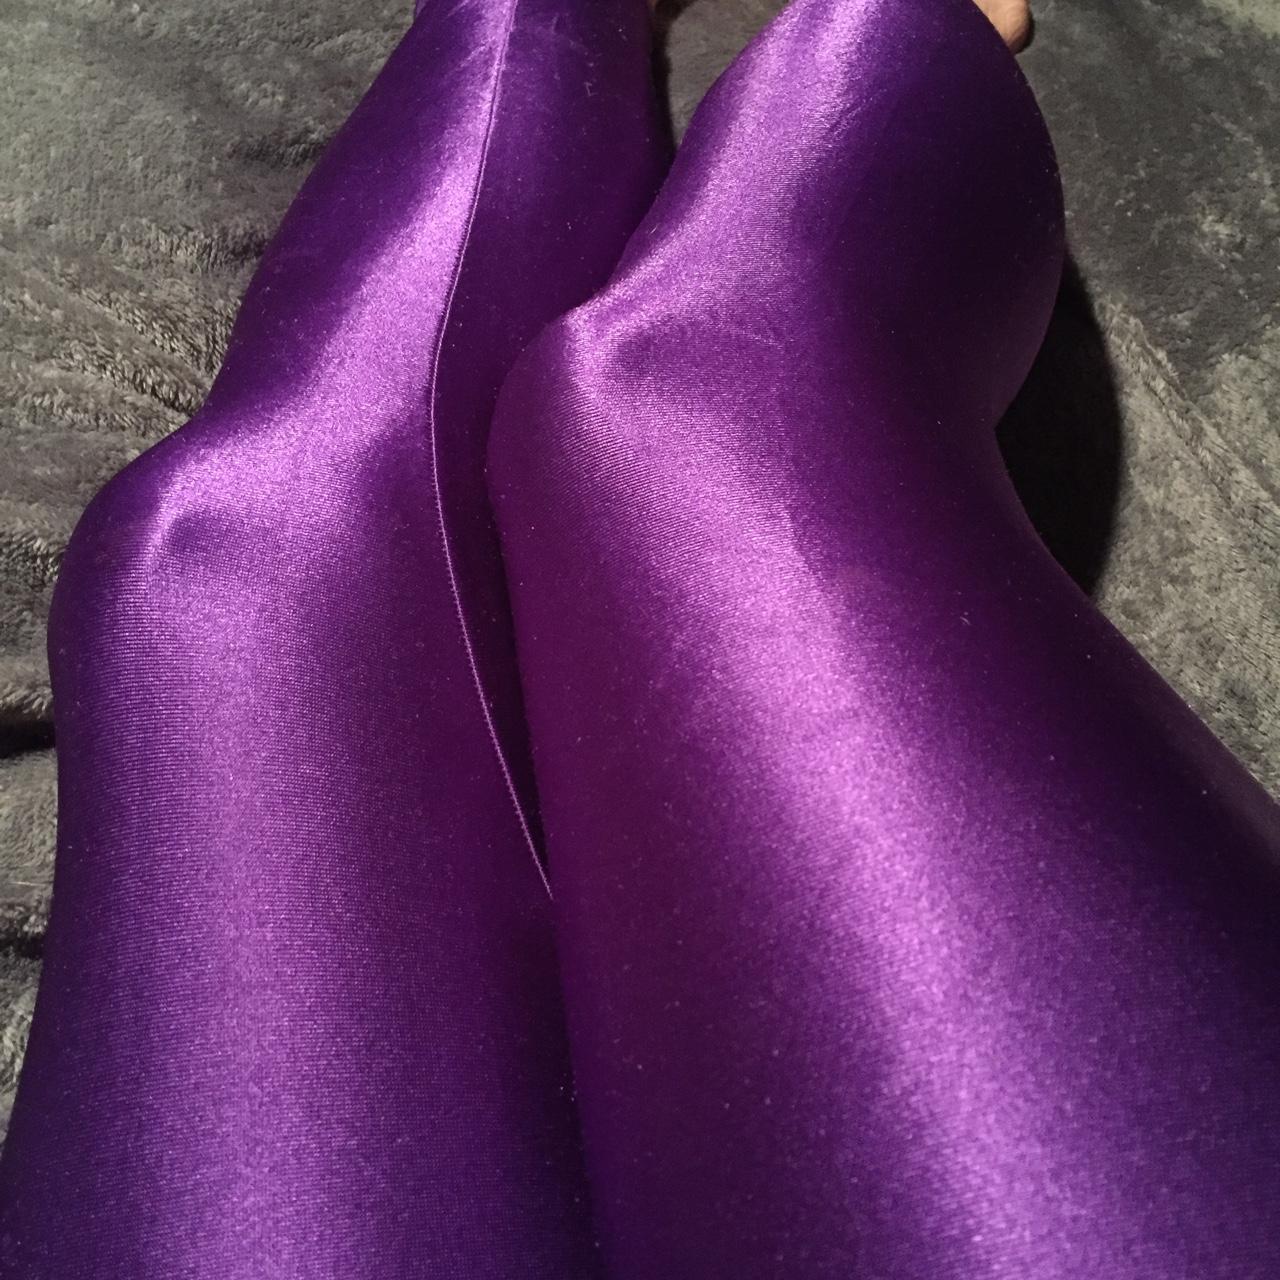 Super shiny and smooth vintage 80s purple leggings.